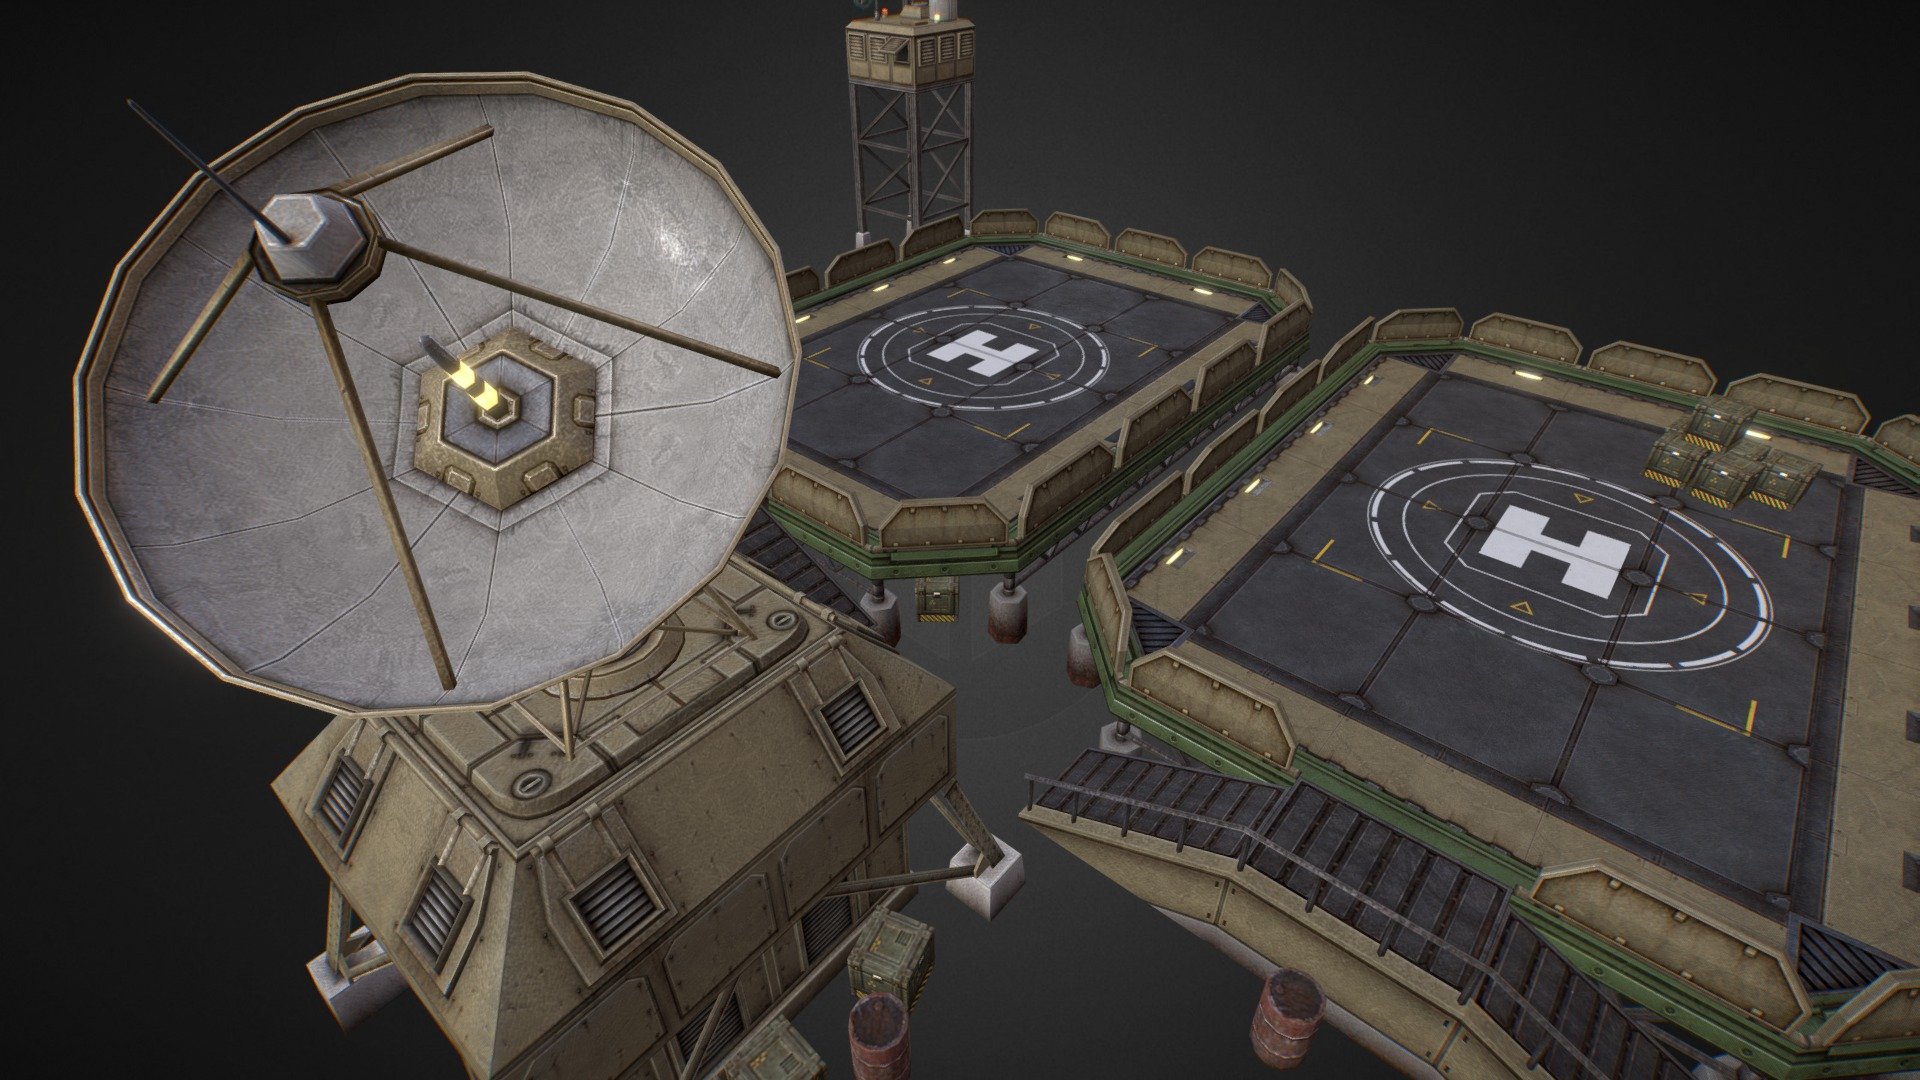 Prop pieces for End of Nations - EoN Helipad - 3D model by Kurtis Smith (@xenobond) 3d model